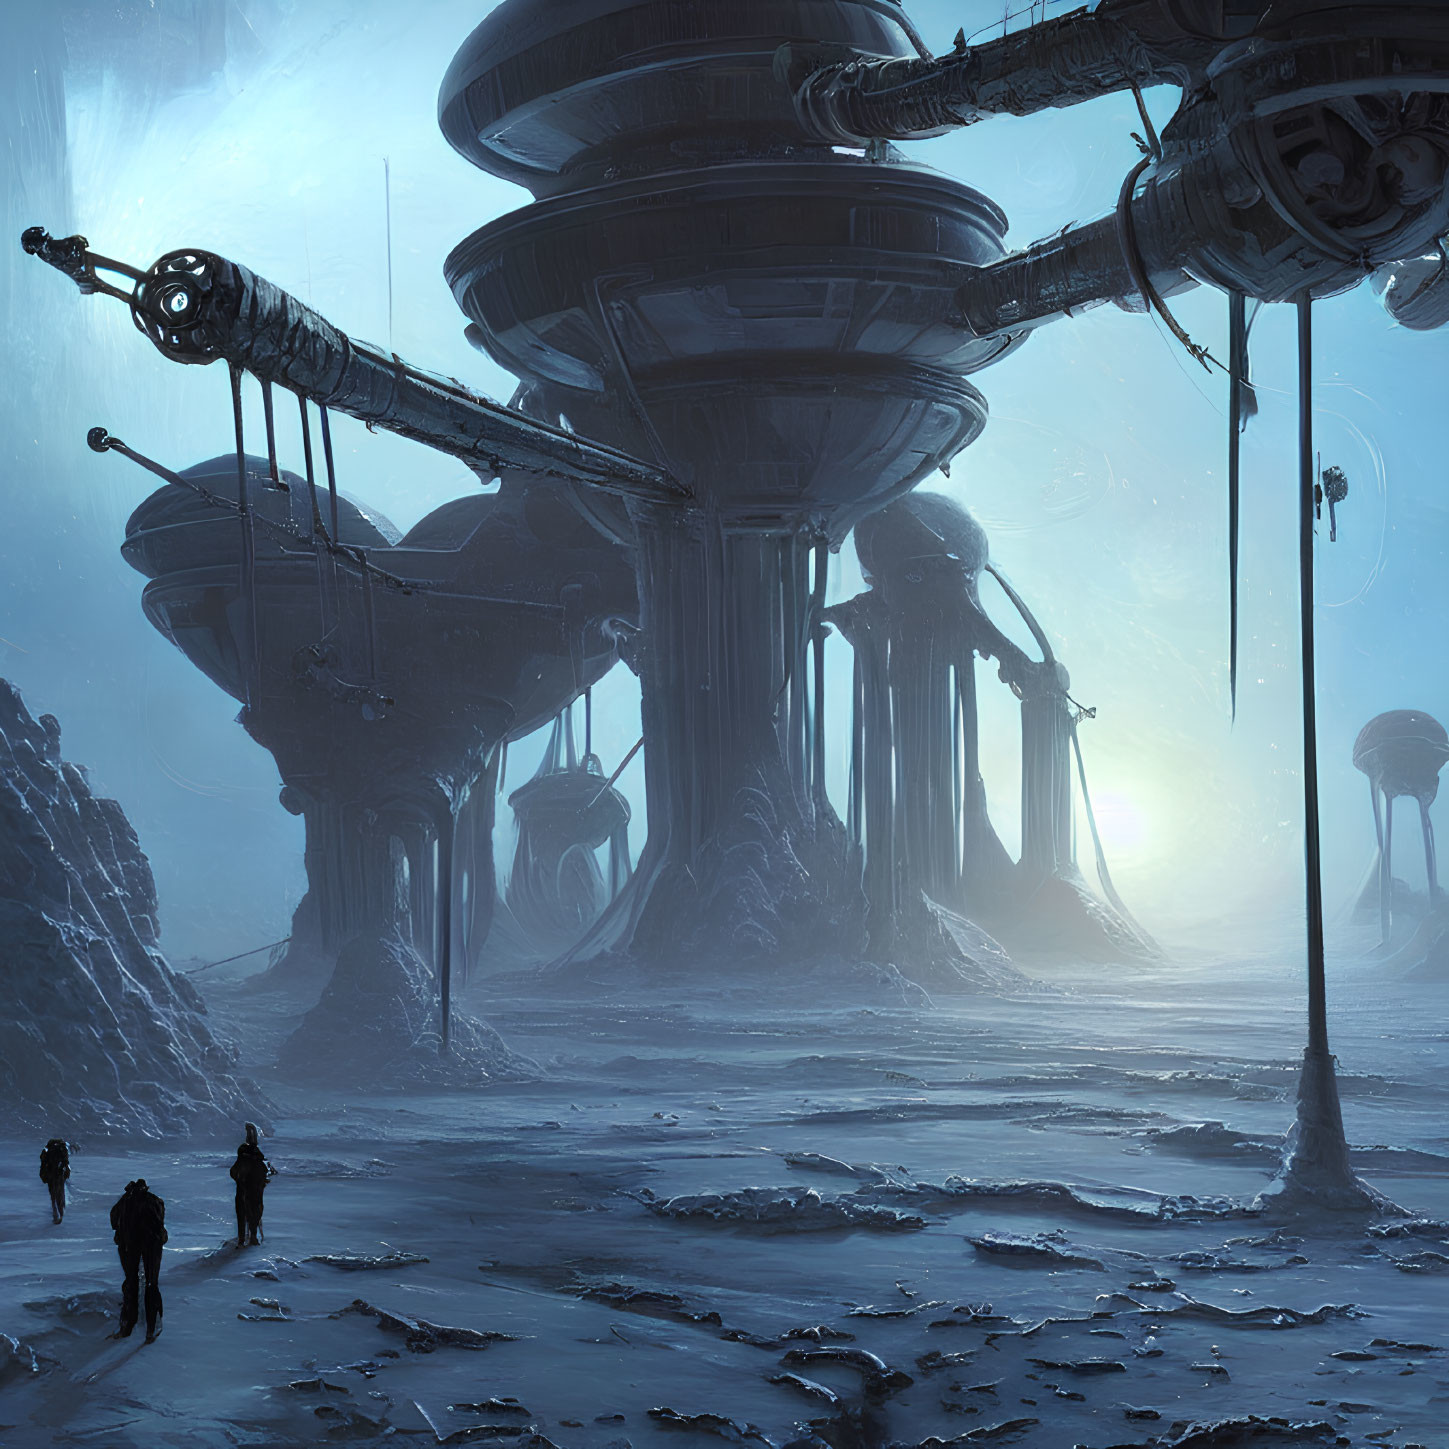 Mysterious alien structures in icy landscape with figures